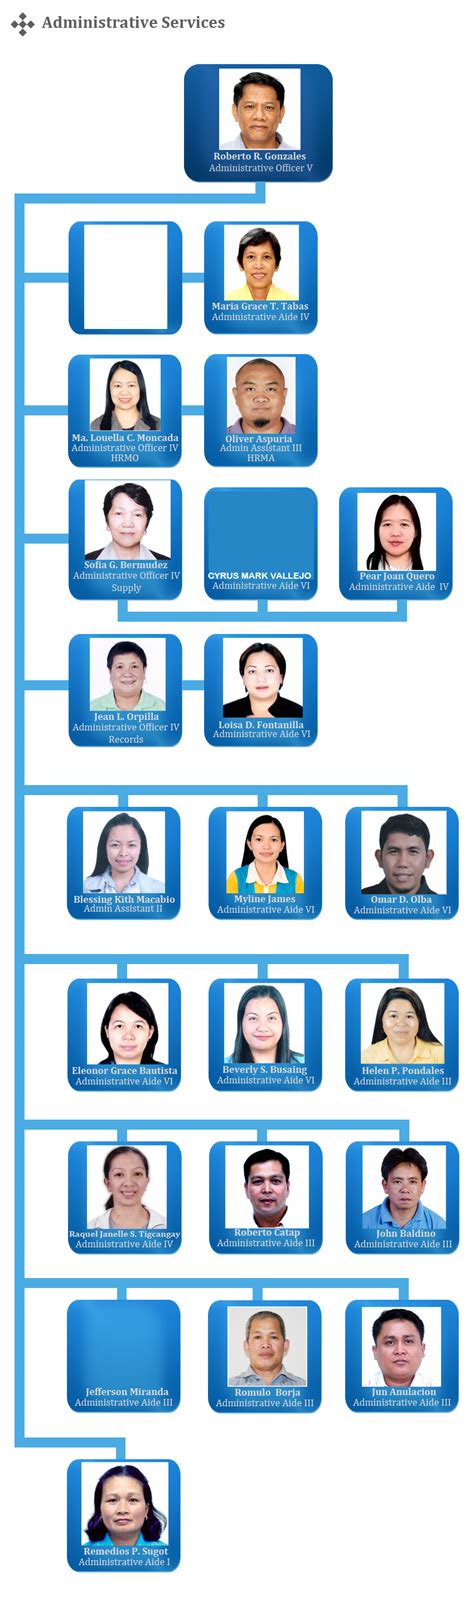 Deped Baguio Division Office Organizational Structure — Deped Baguio